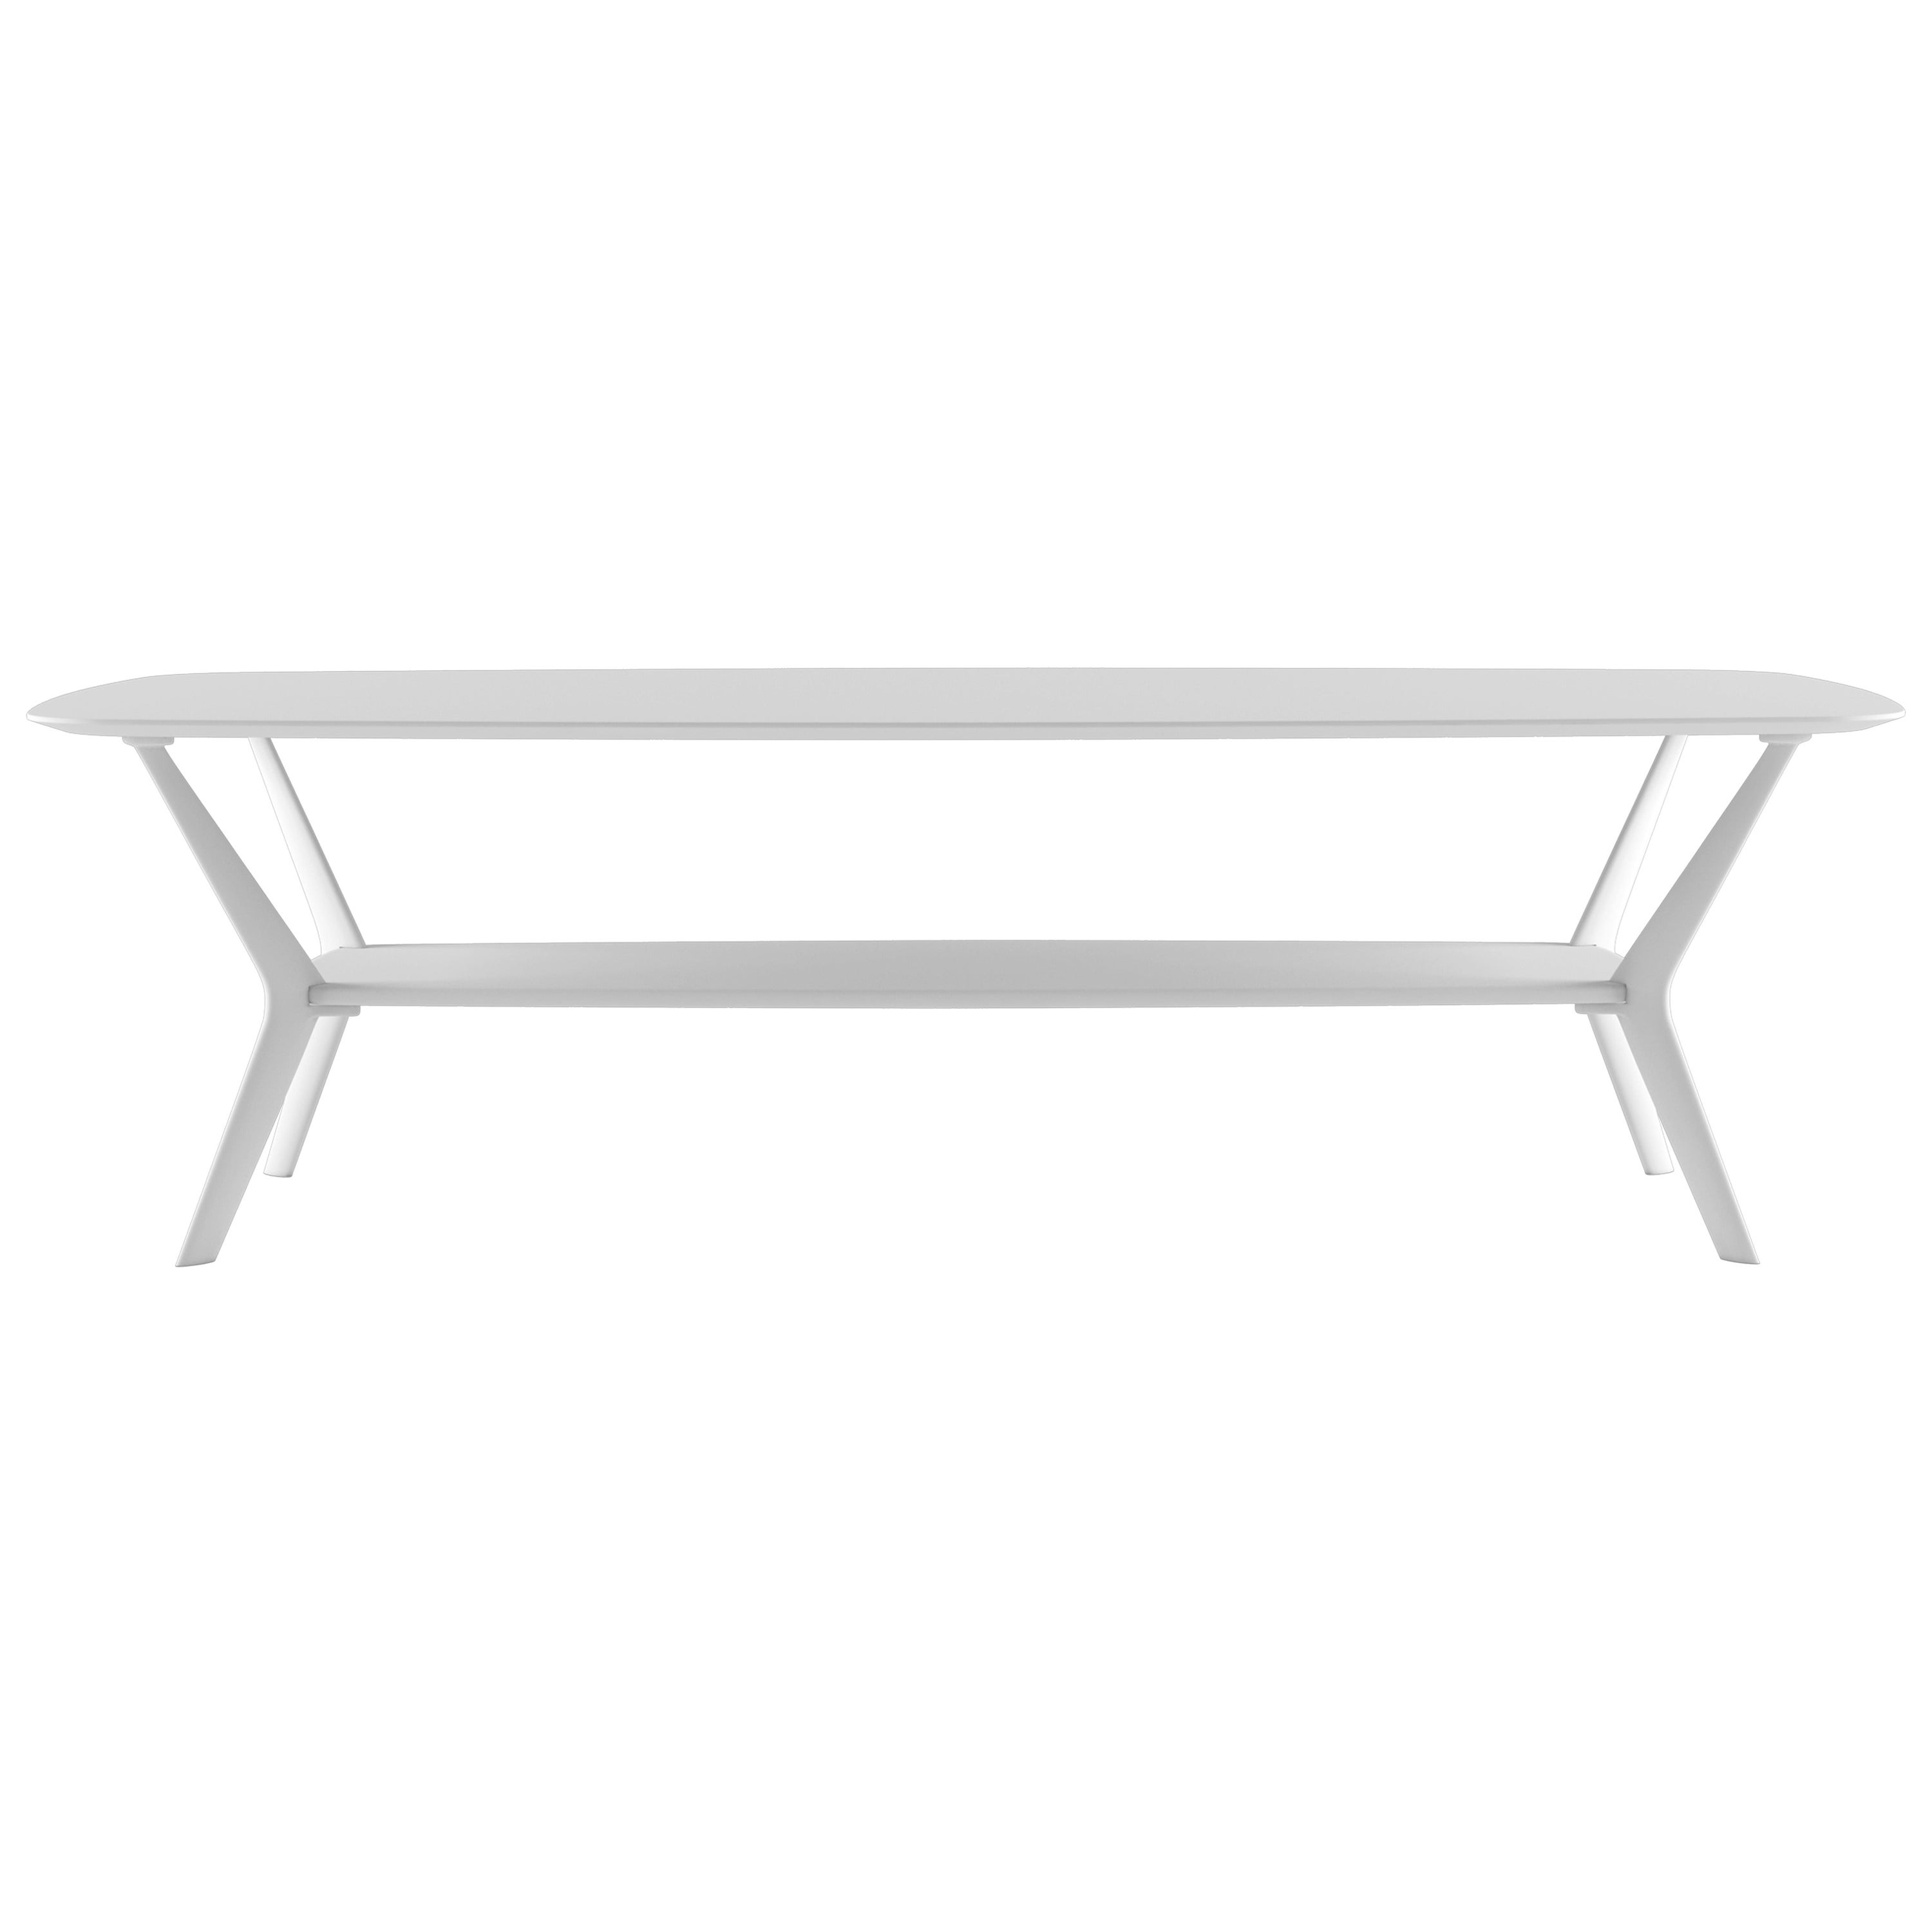 Alias B06 Biplane XS 60x120 Outdoor Table in White Top and Lacquered Frame